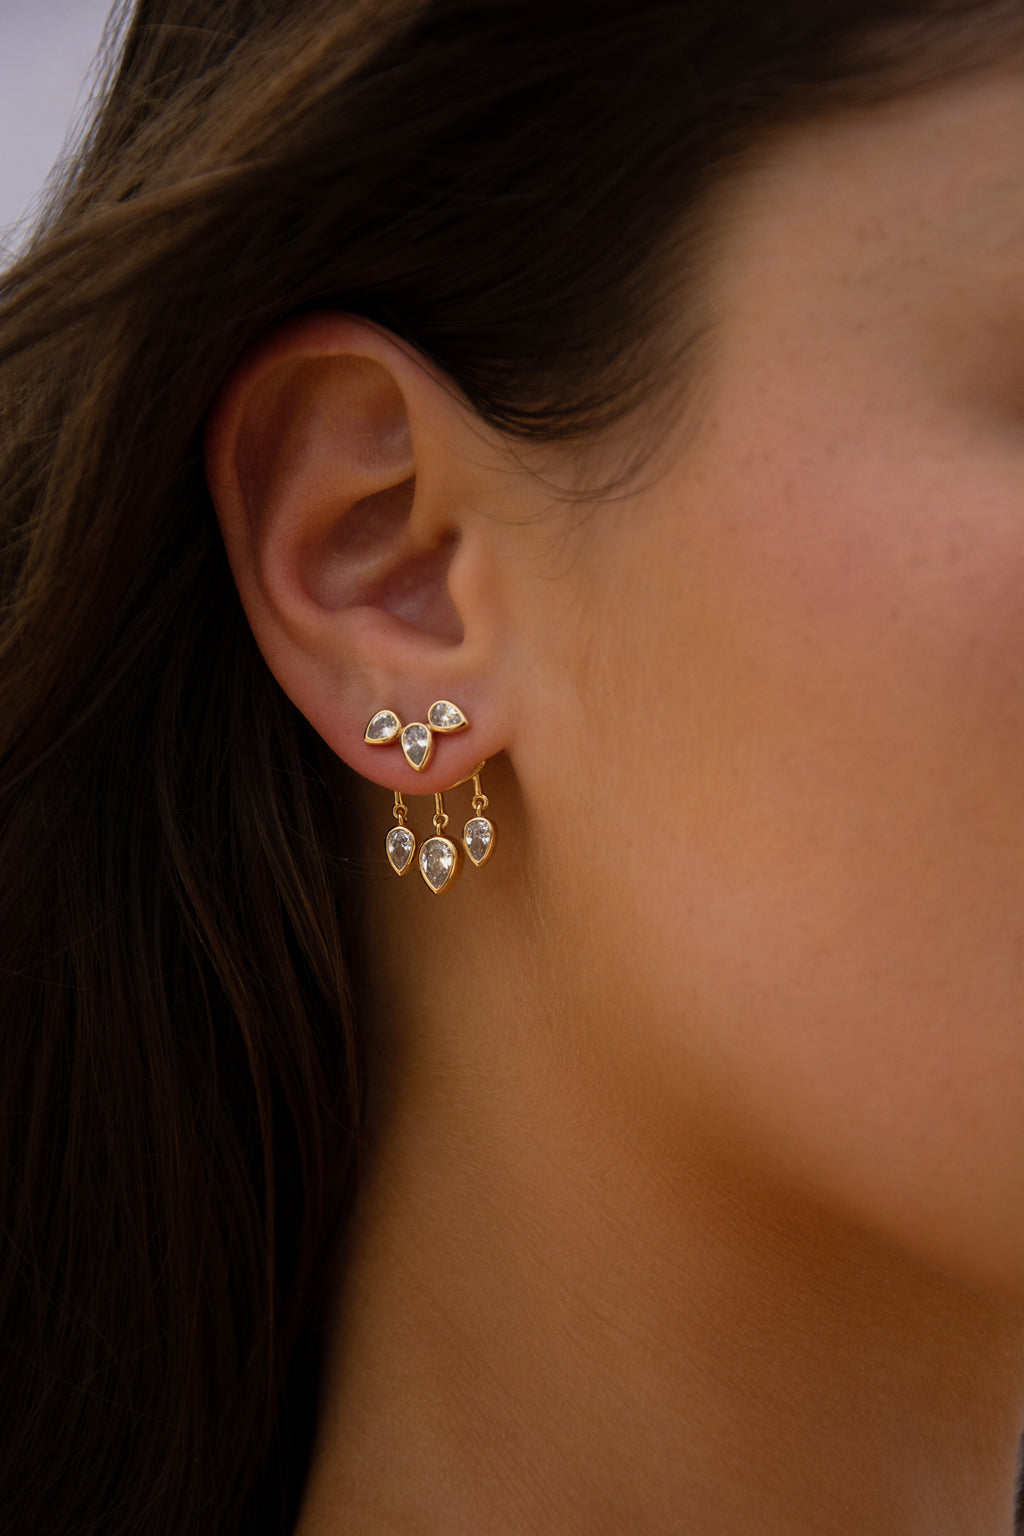 FRESHWATER PEARL EAR JACKET EARRINGS - The Littl A$129.99 14k Rose Gold 14k  Yellow Gold Bridal (Jewellery Only)